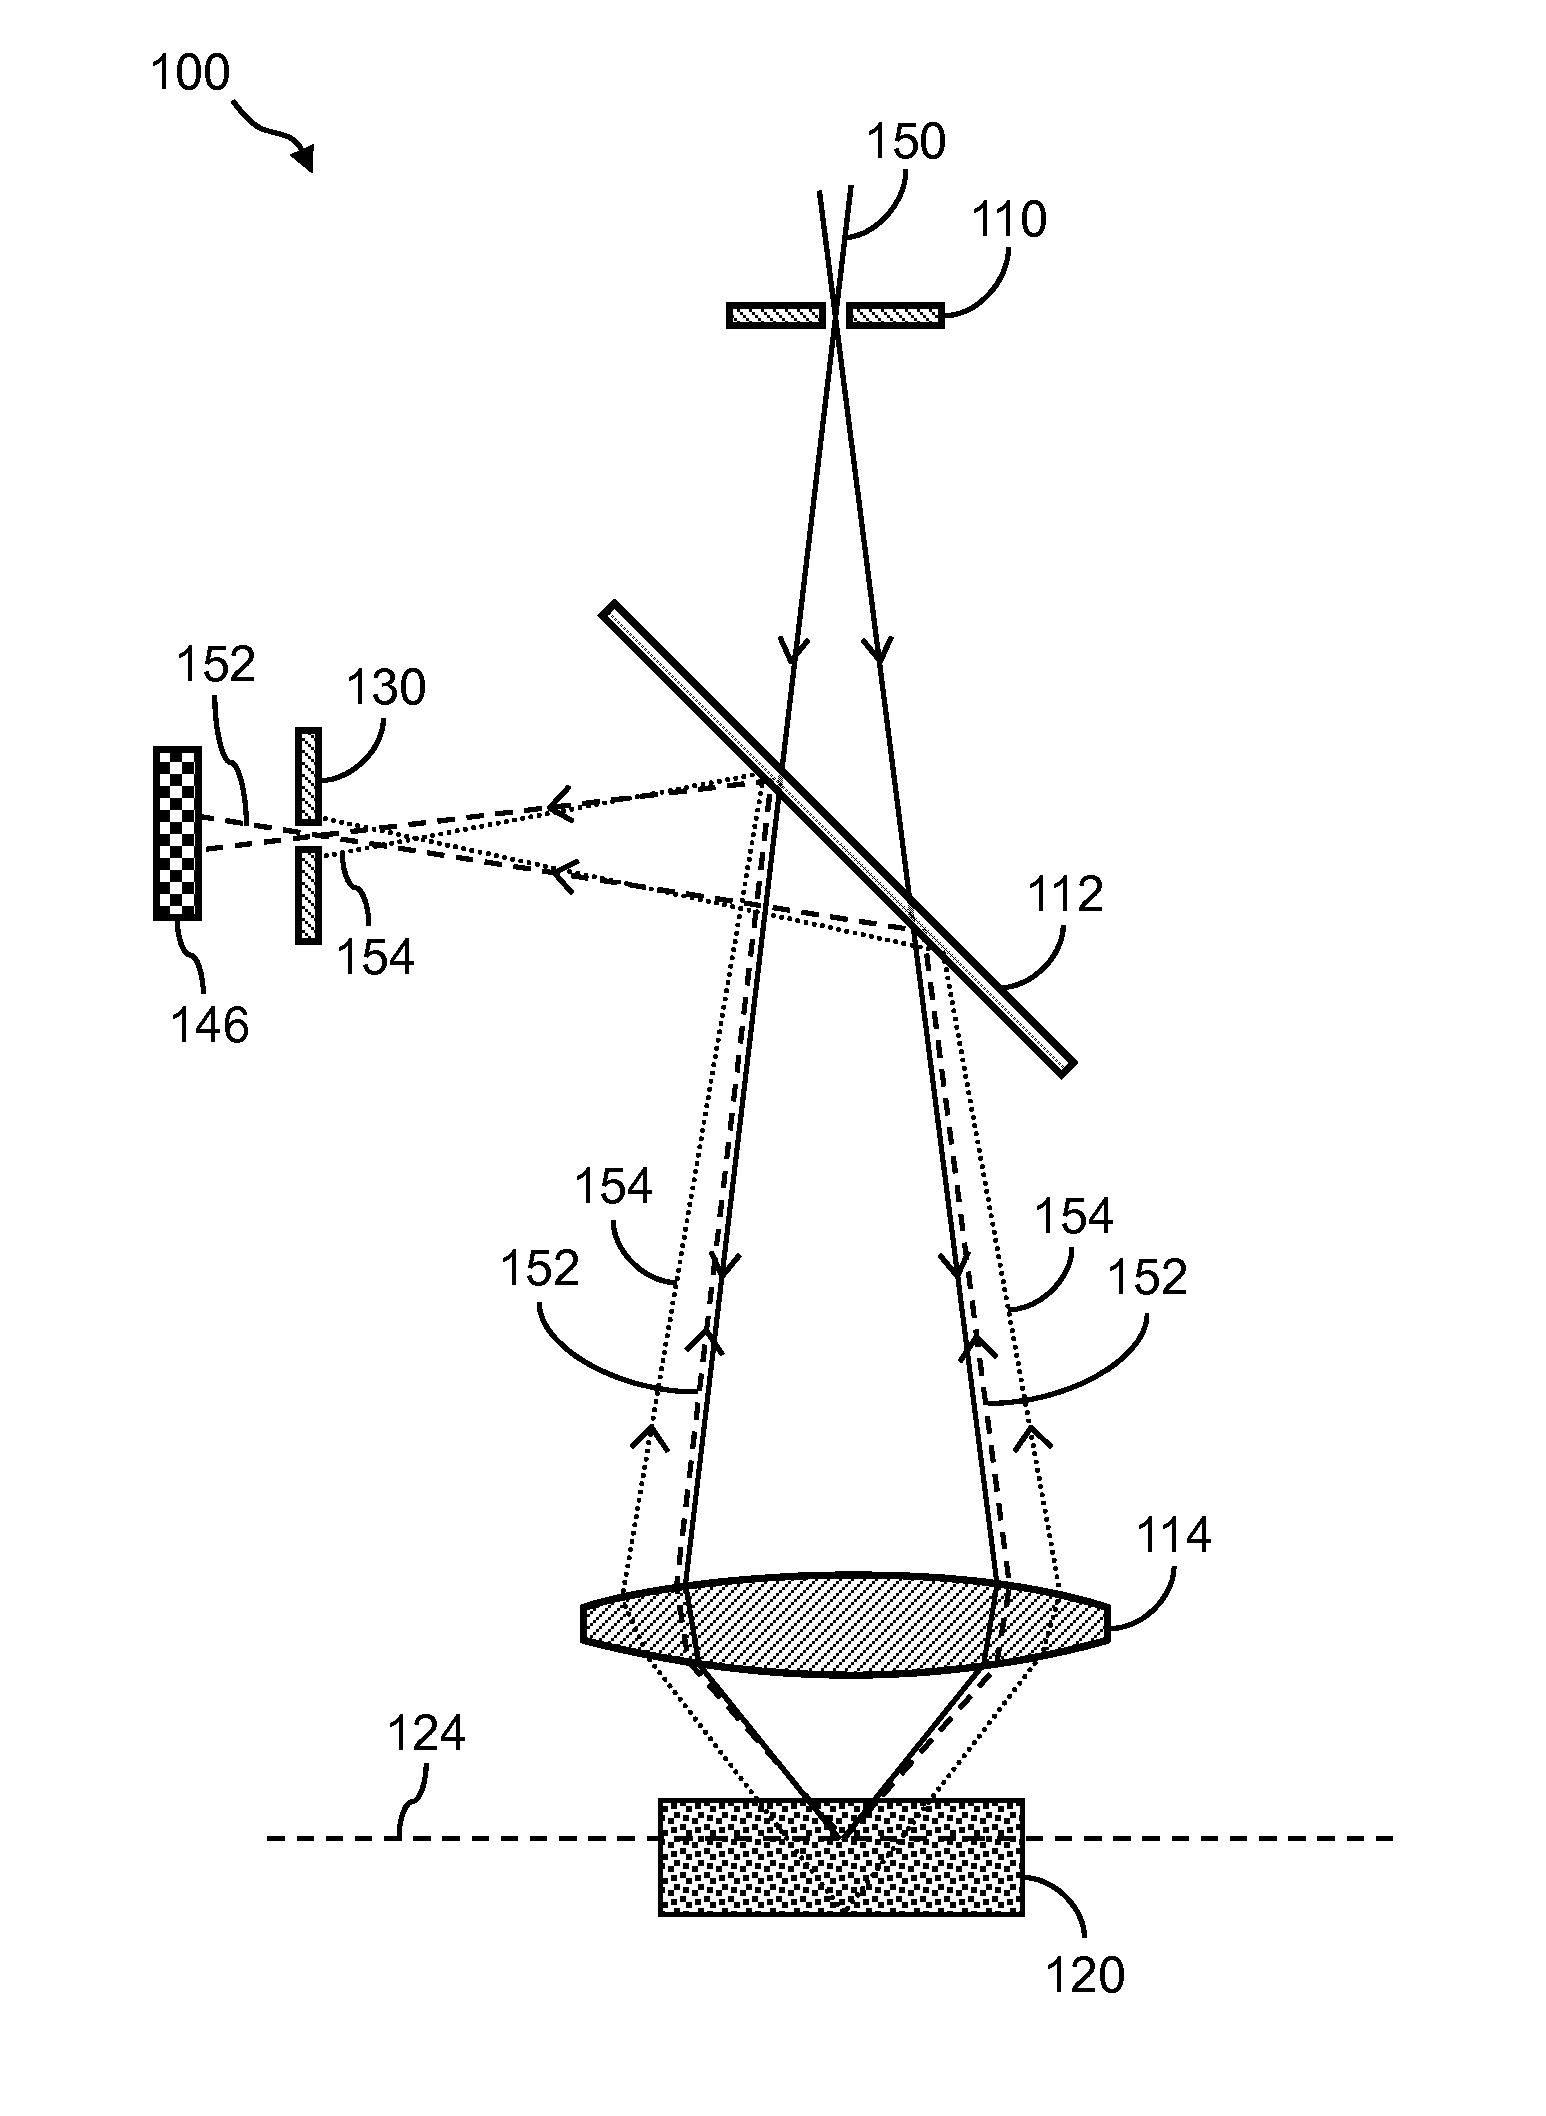 Optical scanning systems for in situ genetic analysis